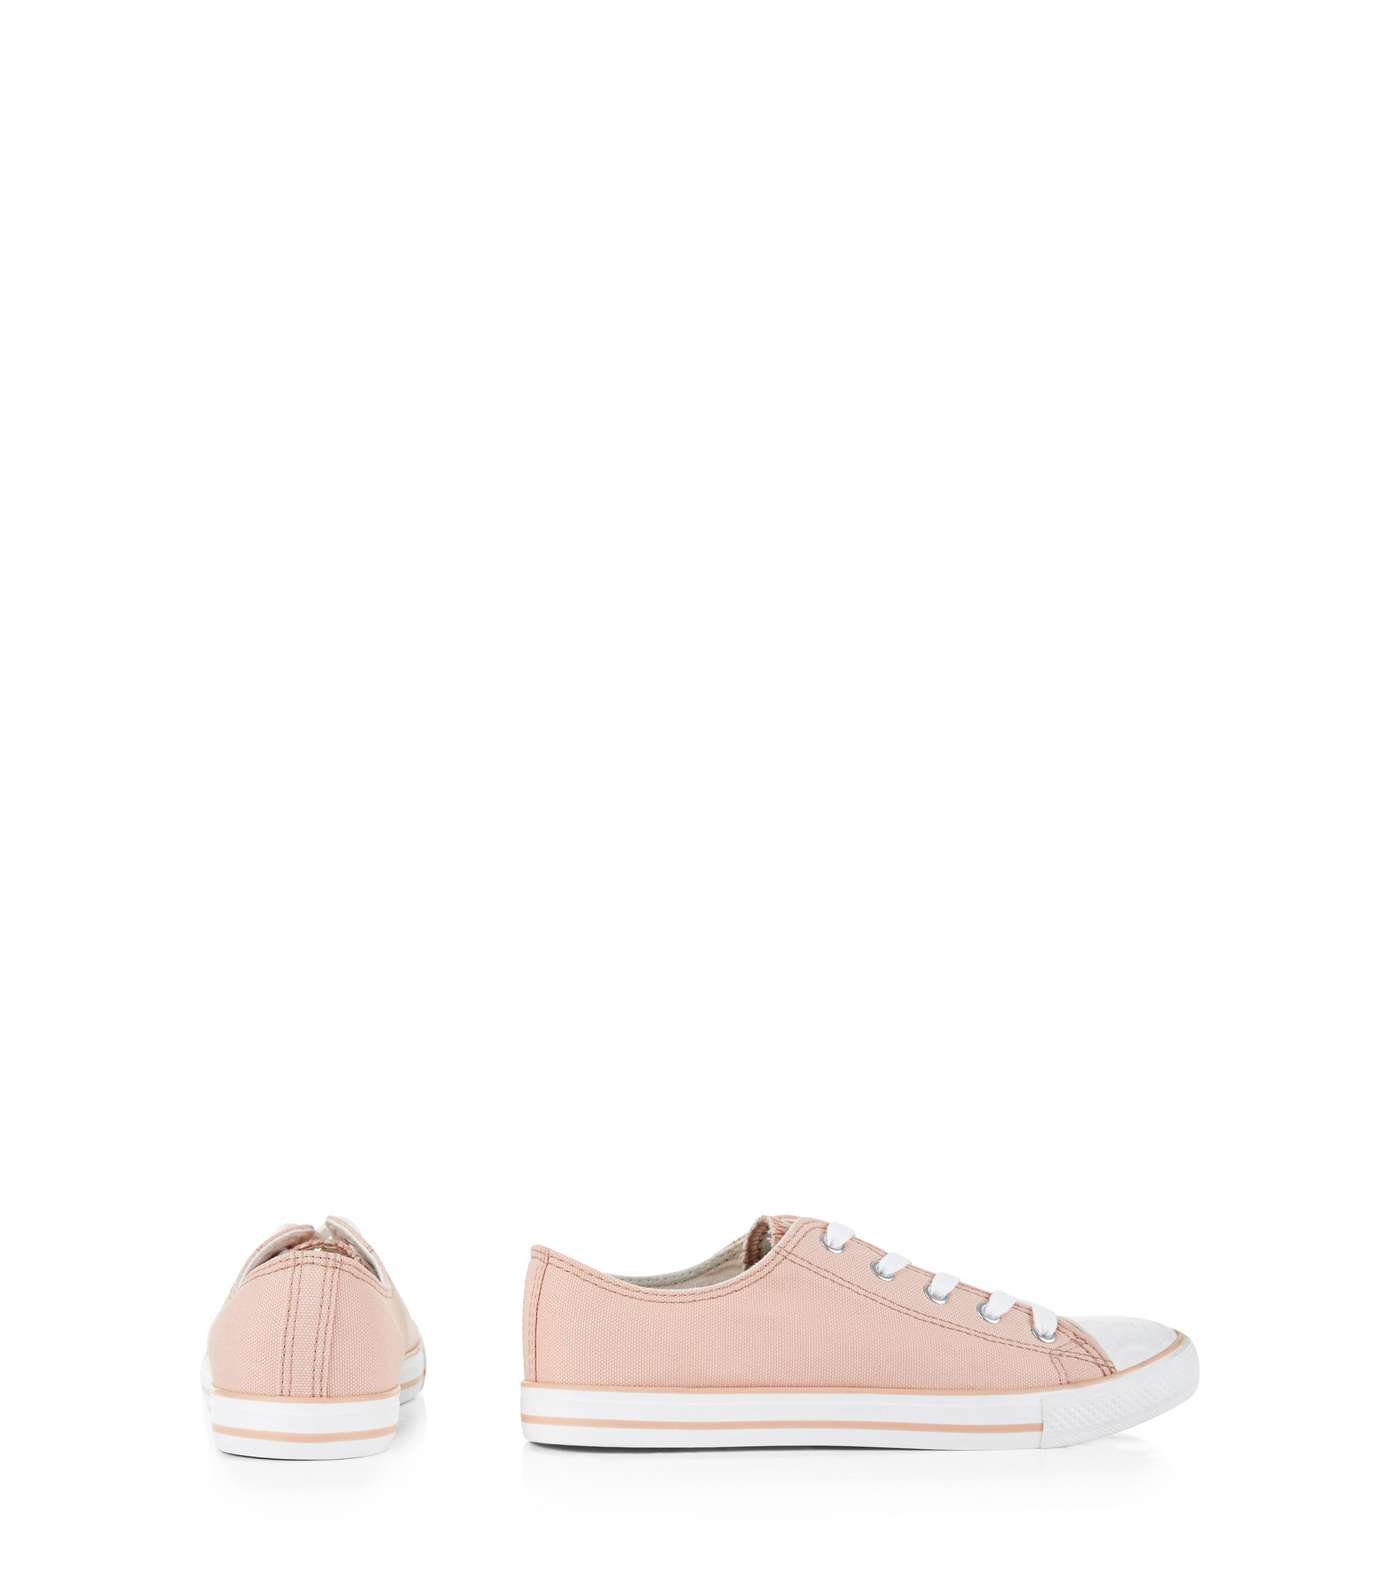 Mid Pink Lace Up Stripe Sole Plimsolls  Image 4